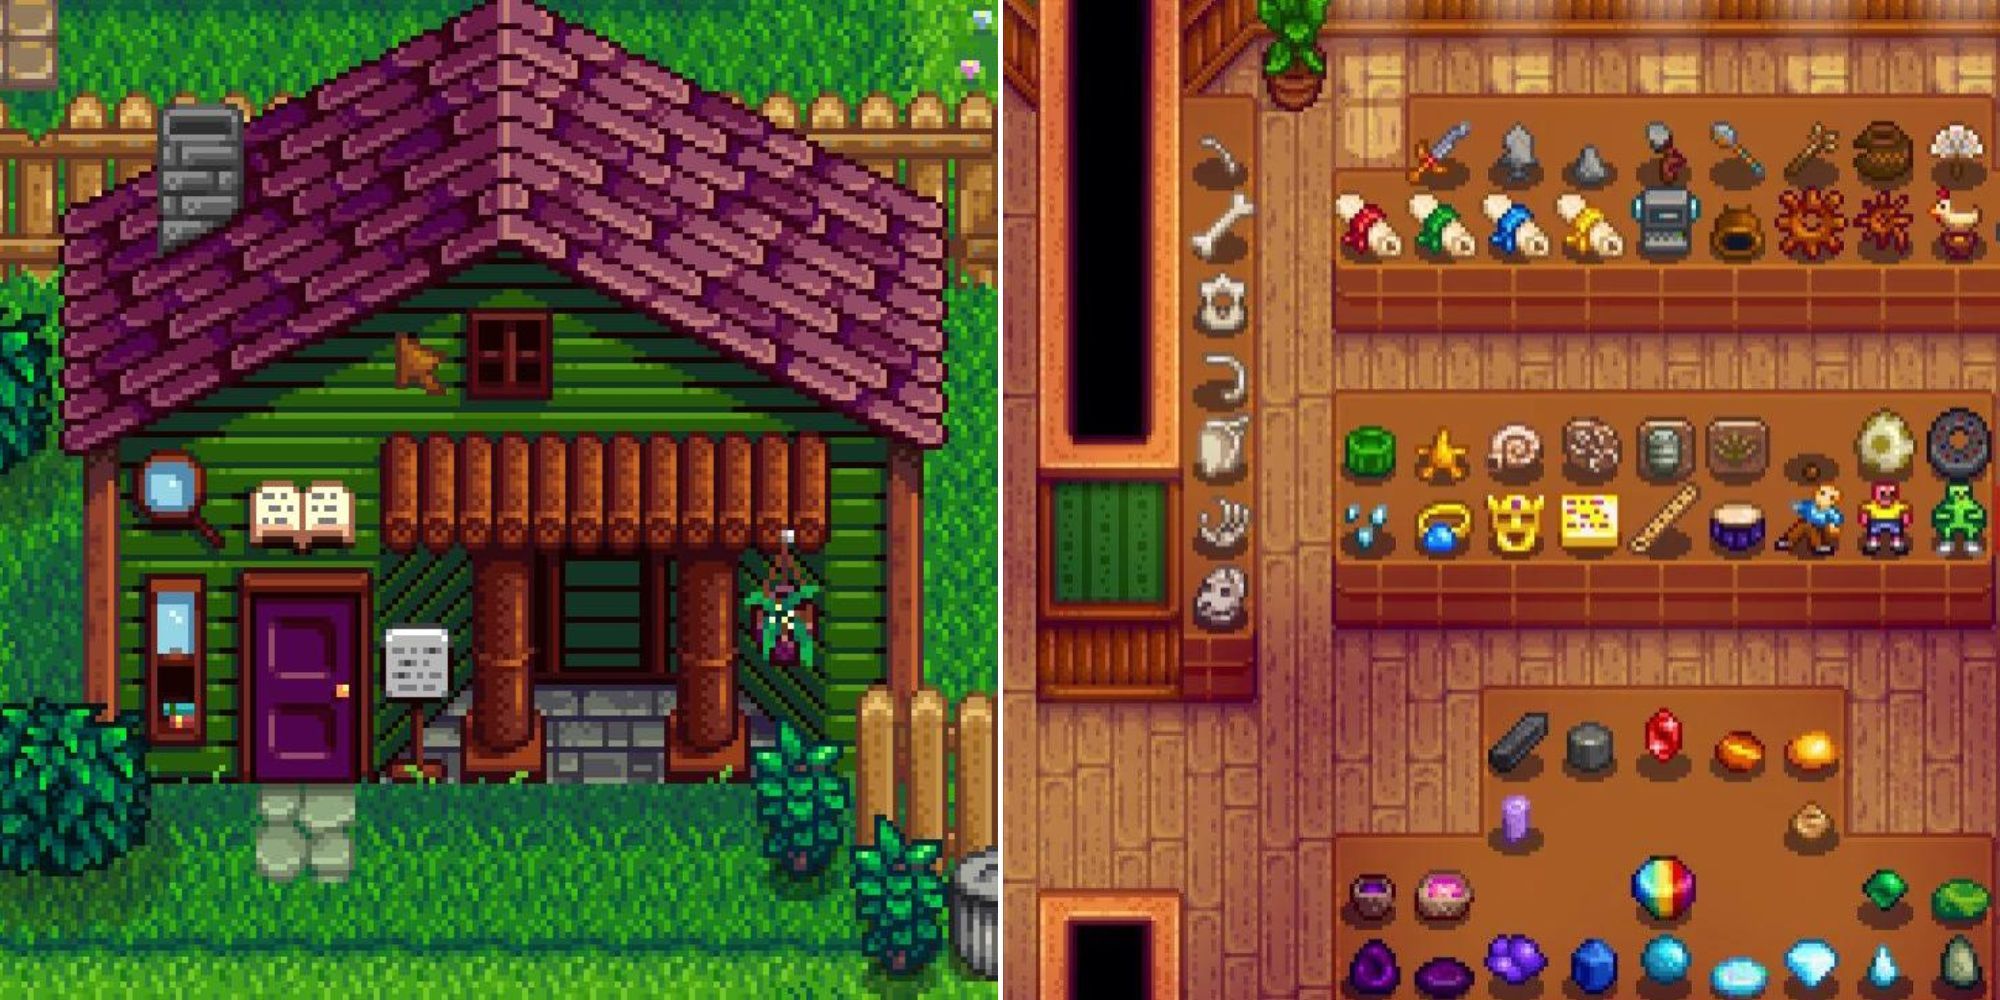 The Museum exterior and artefacts on display in Stardew Valley